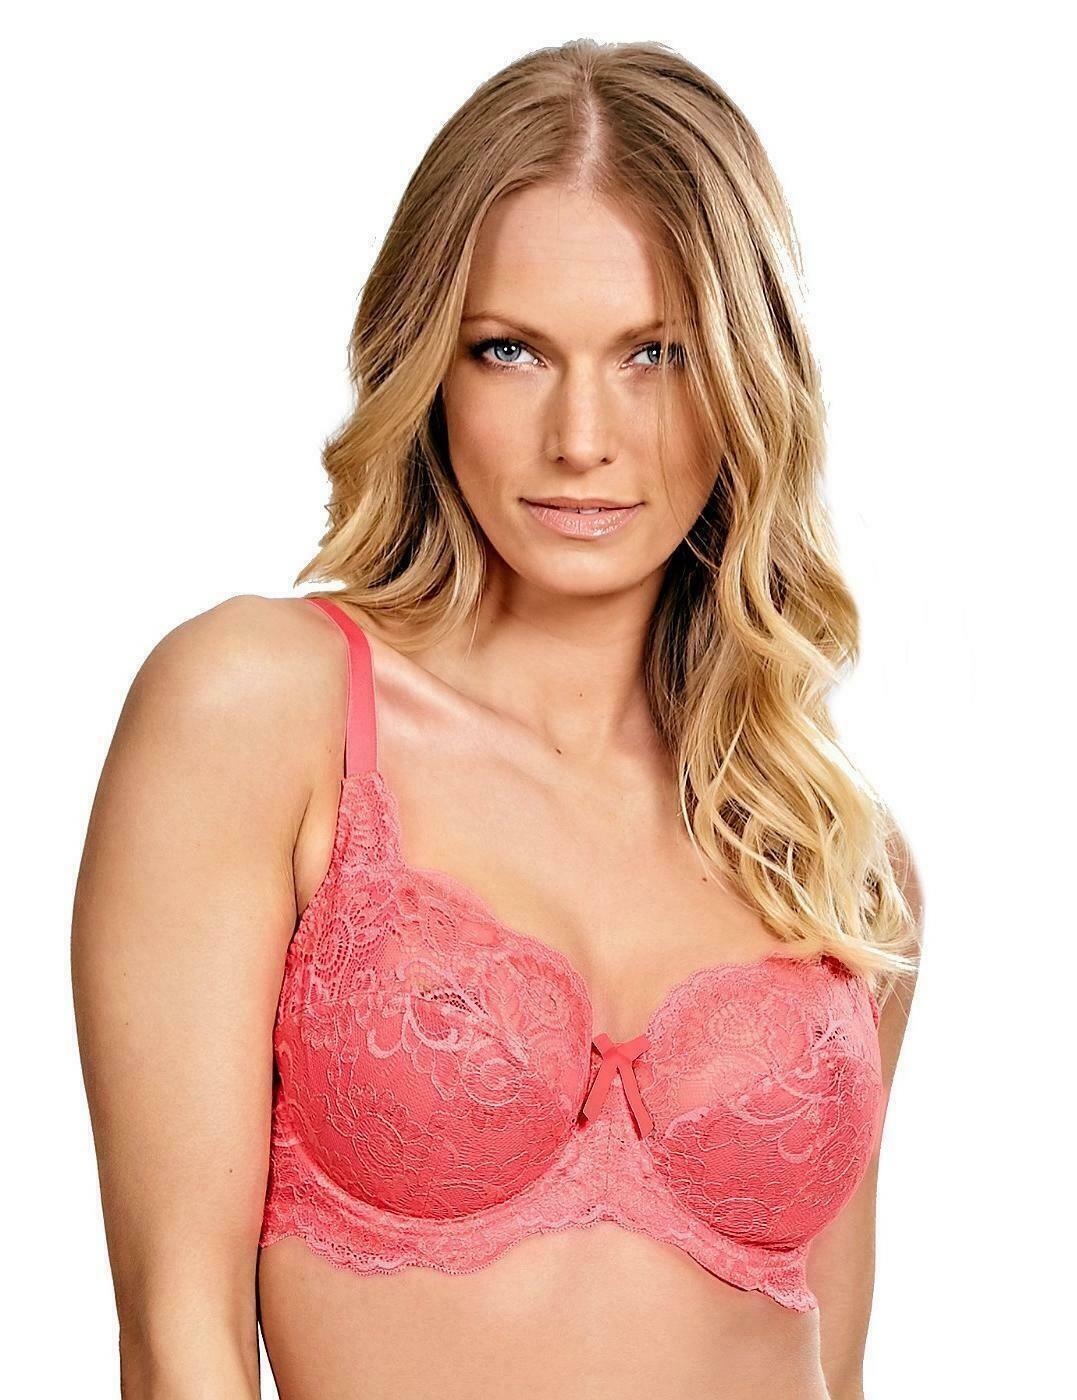 Panache Lingerie Andorra 5675 Underwired Non Padded Full Cup Bra - Coral